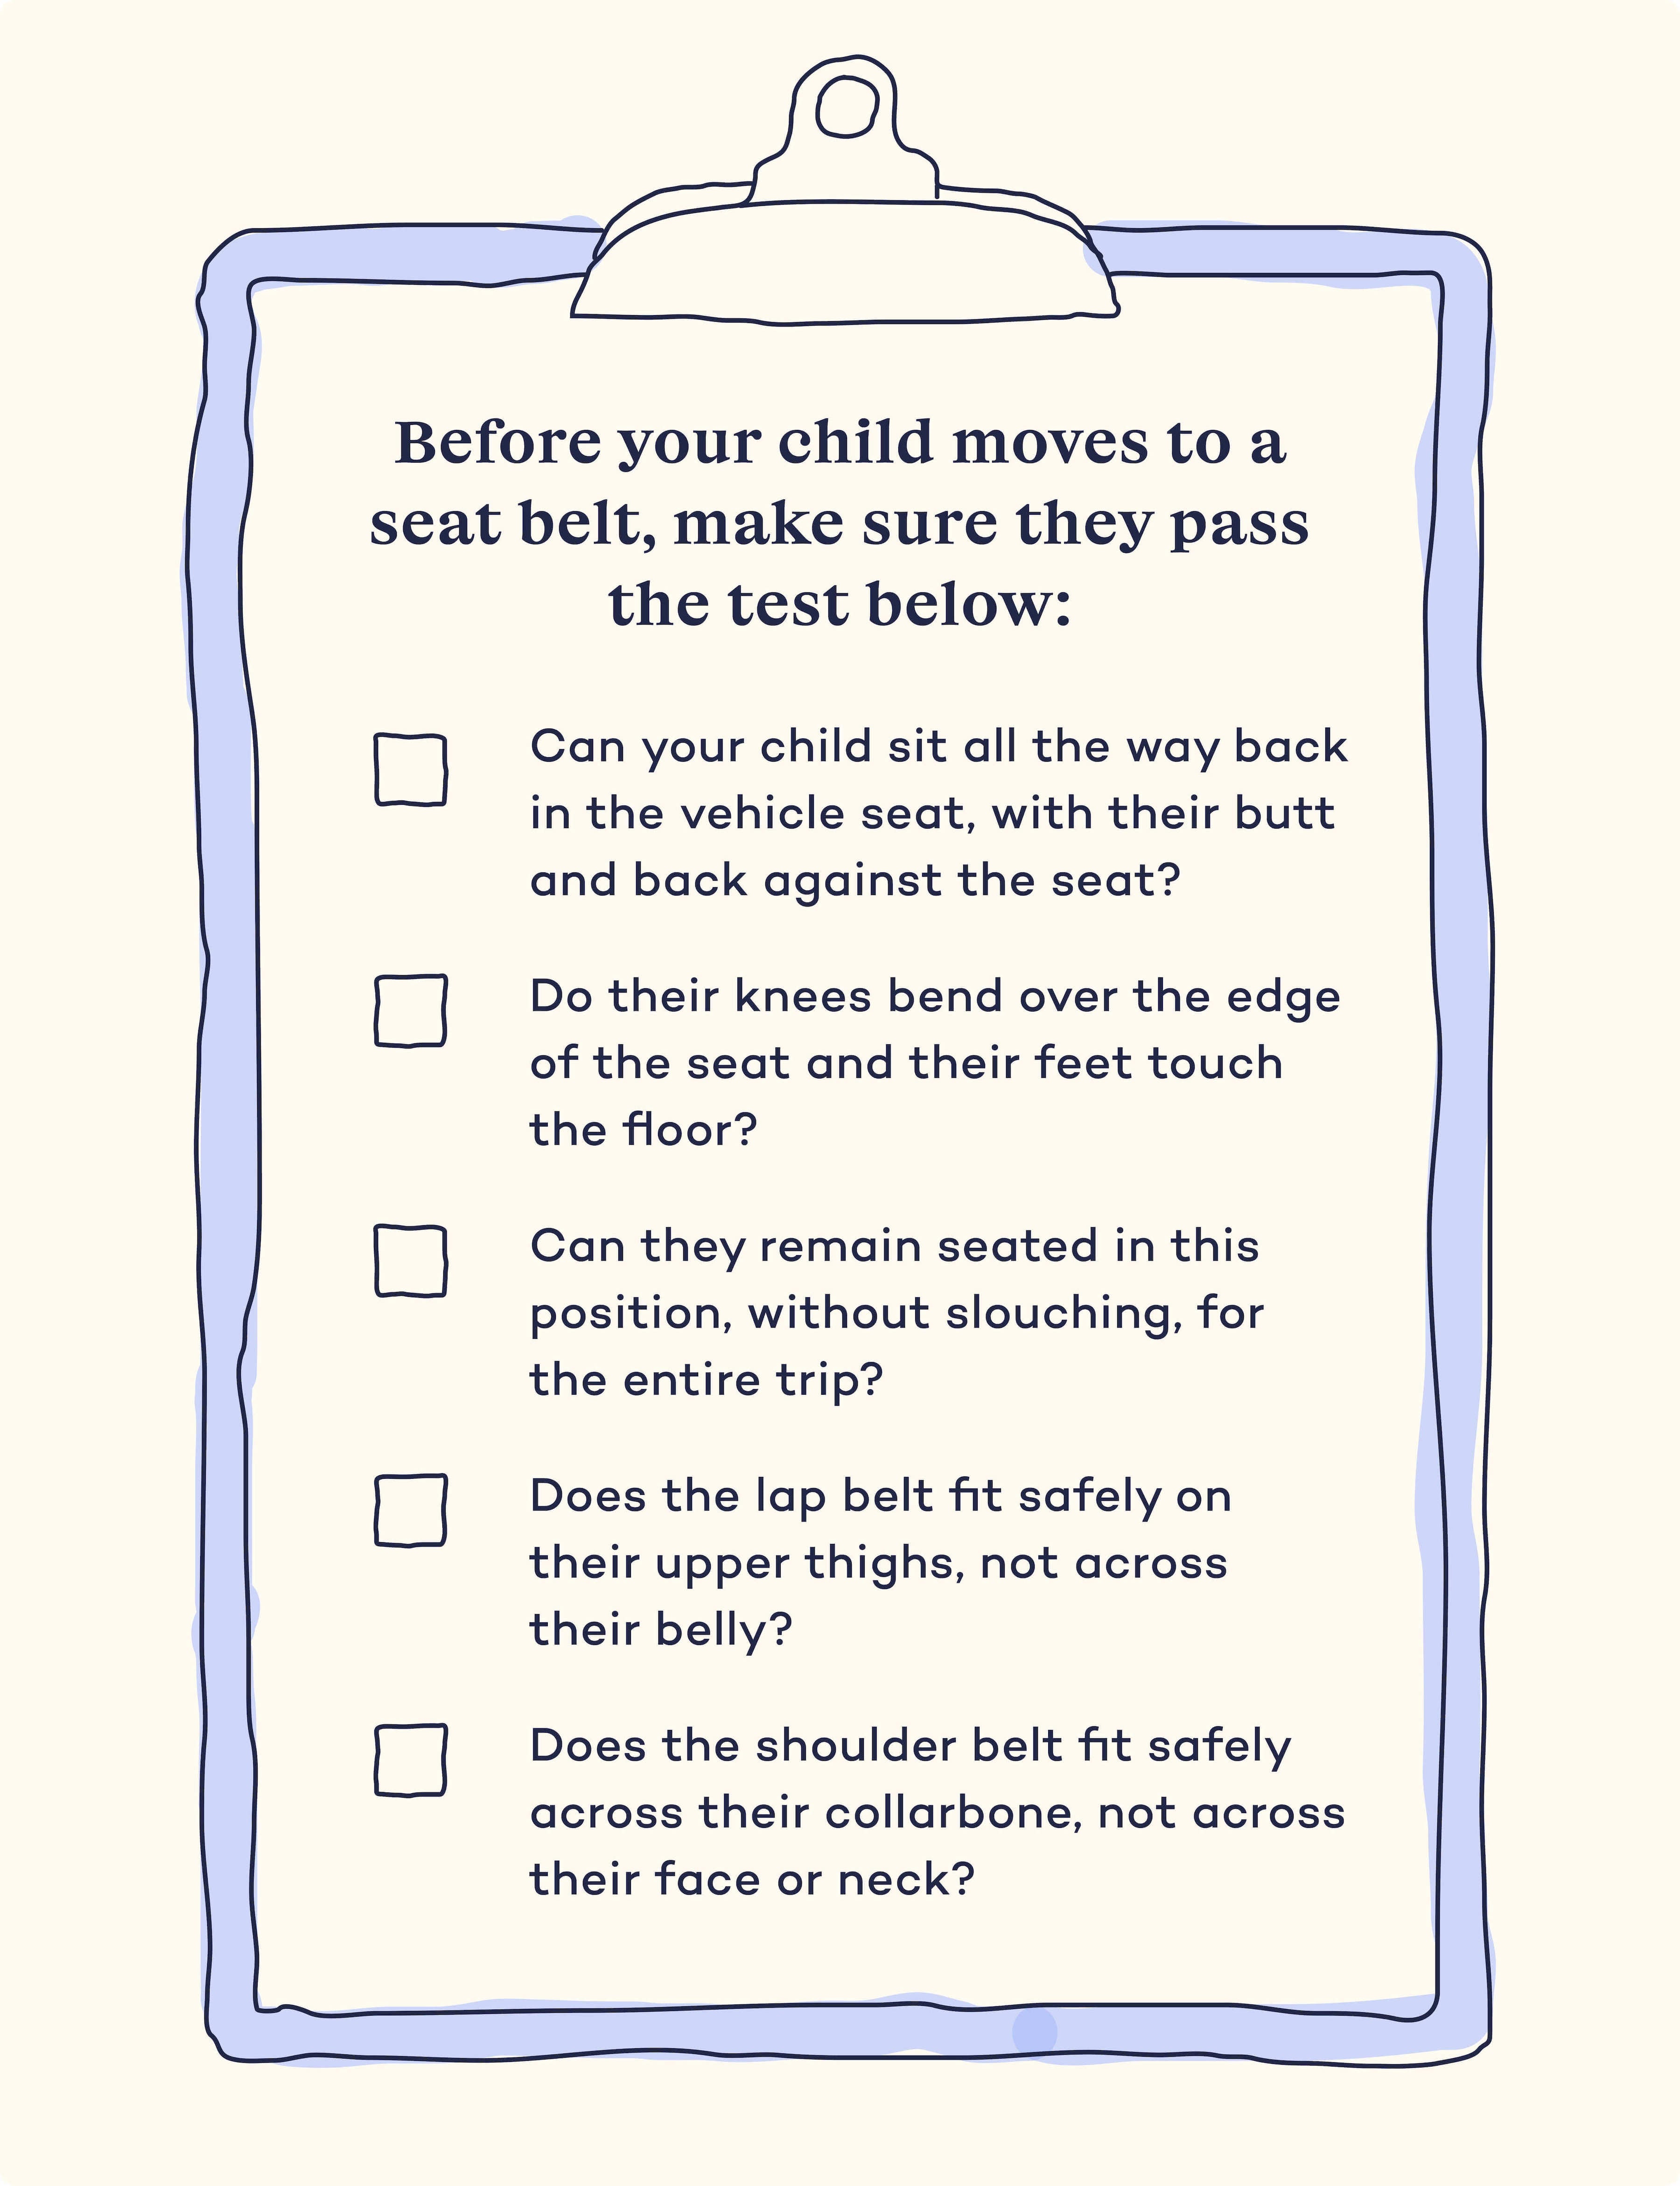 a checklist of the 5 step safety questions to ask before moving your little one to a seat belt